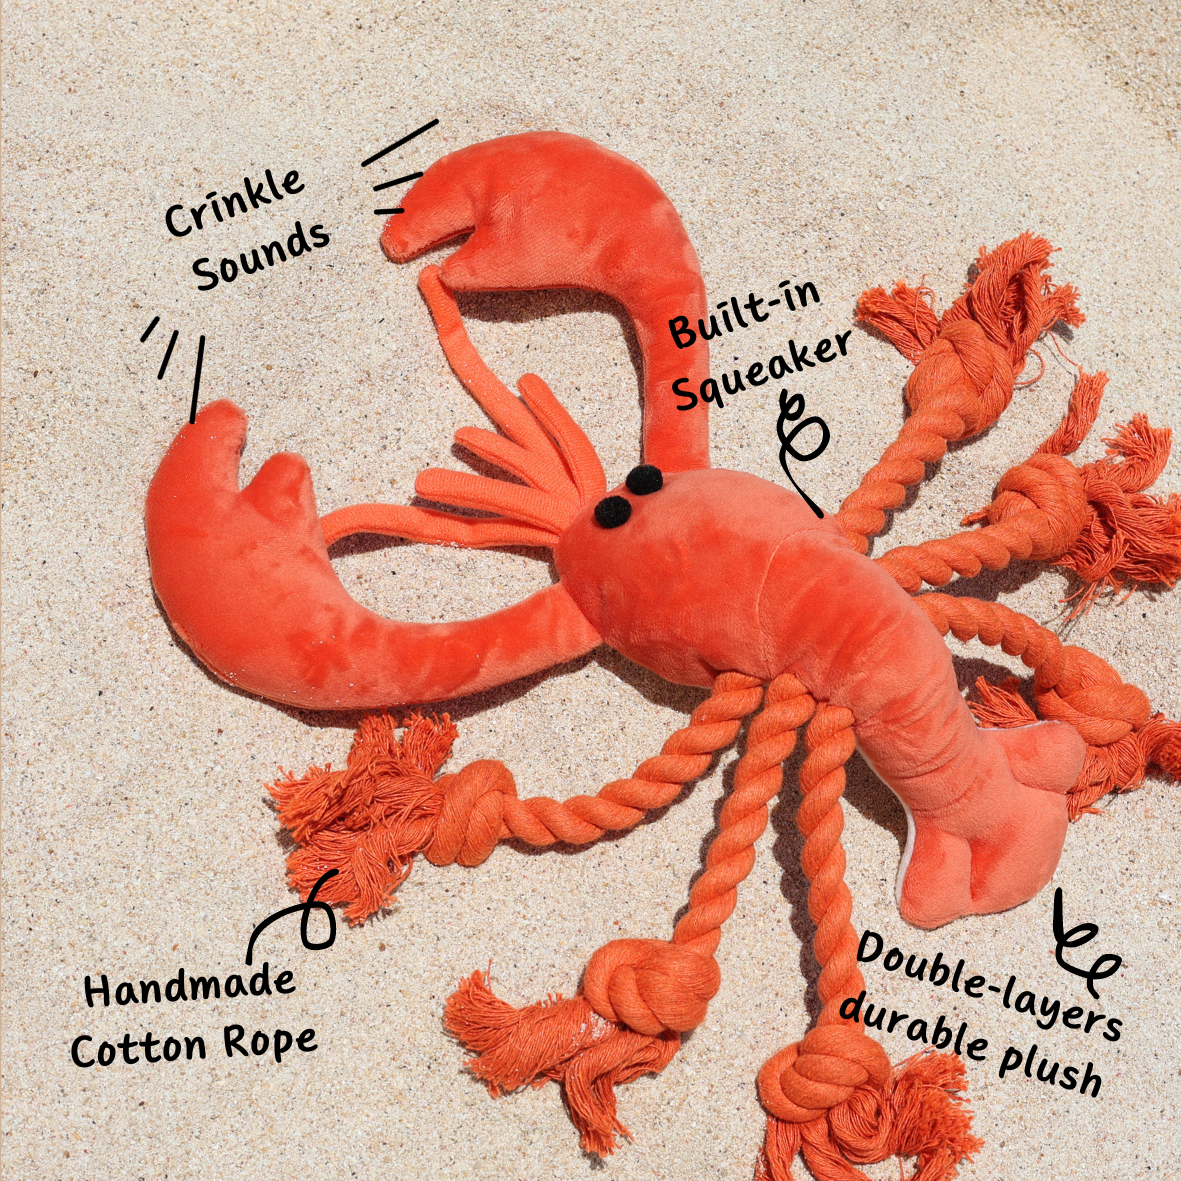 Snuffle Toy - Lobster